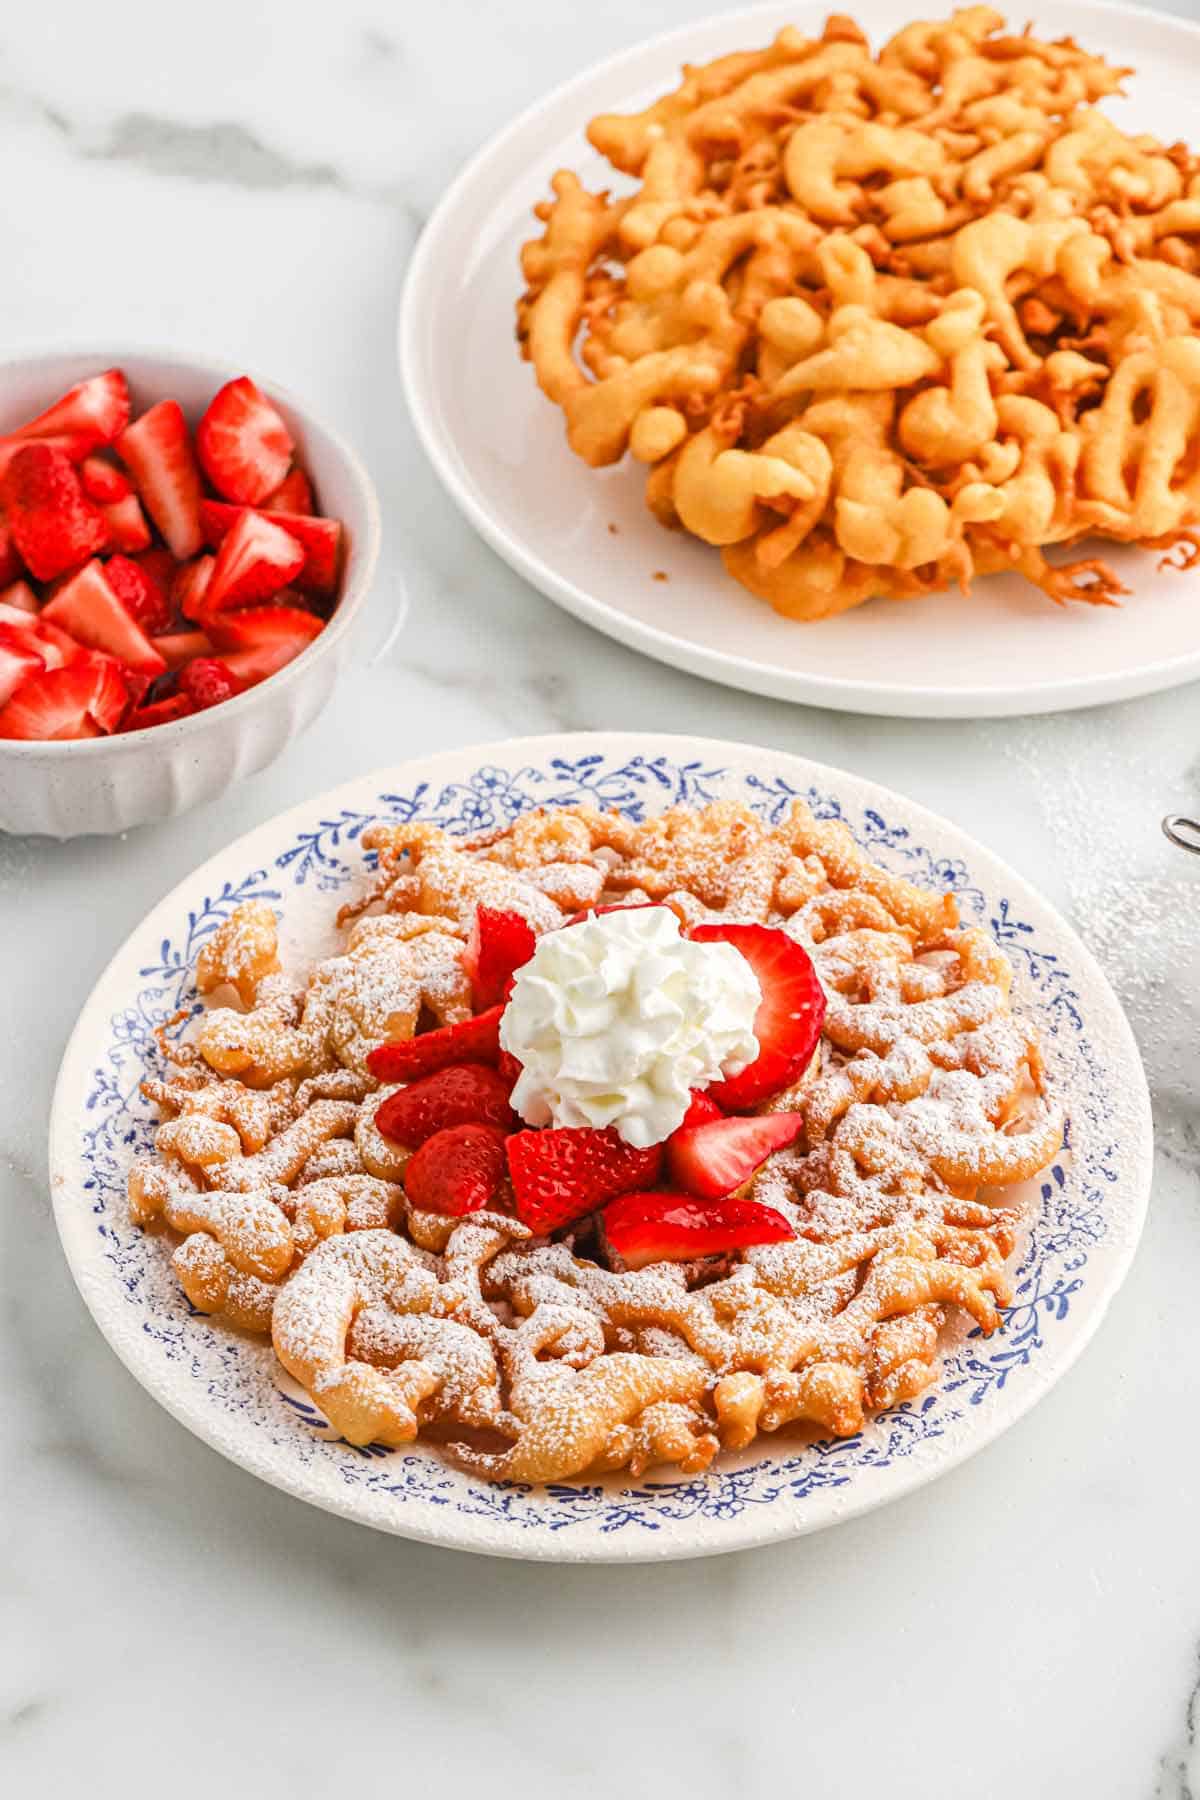 Funnel cake served up sprinkled with powdered sugar, whipped cream and fresh berries.